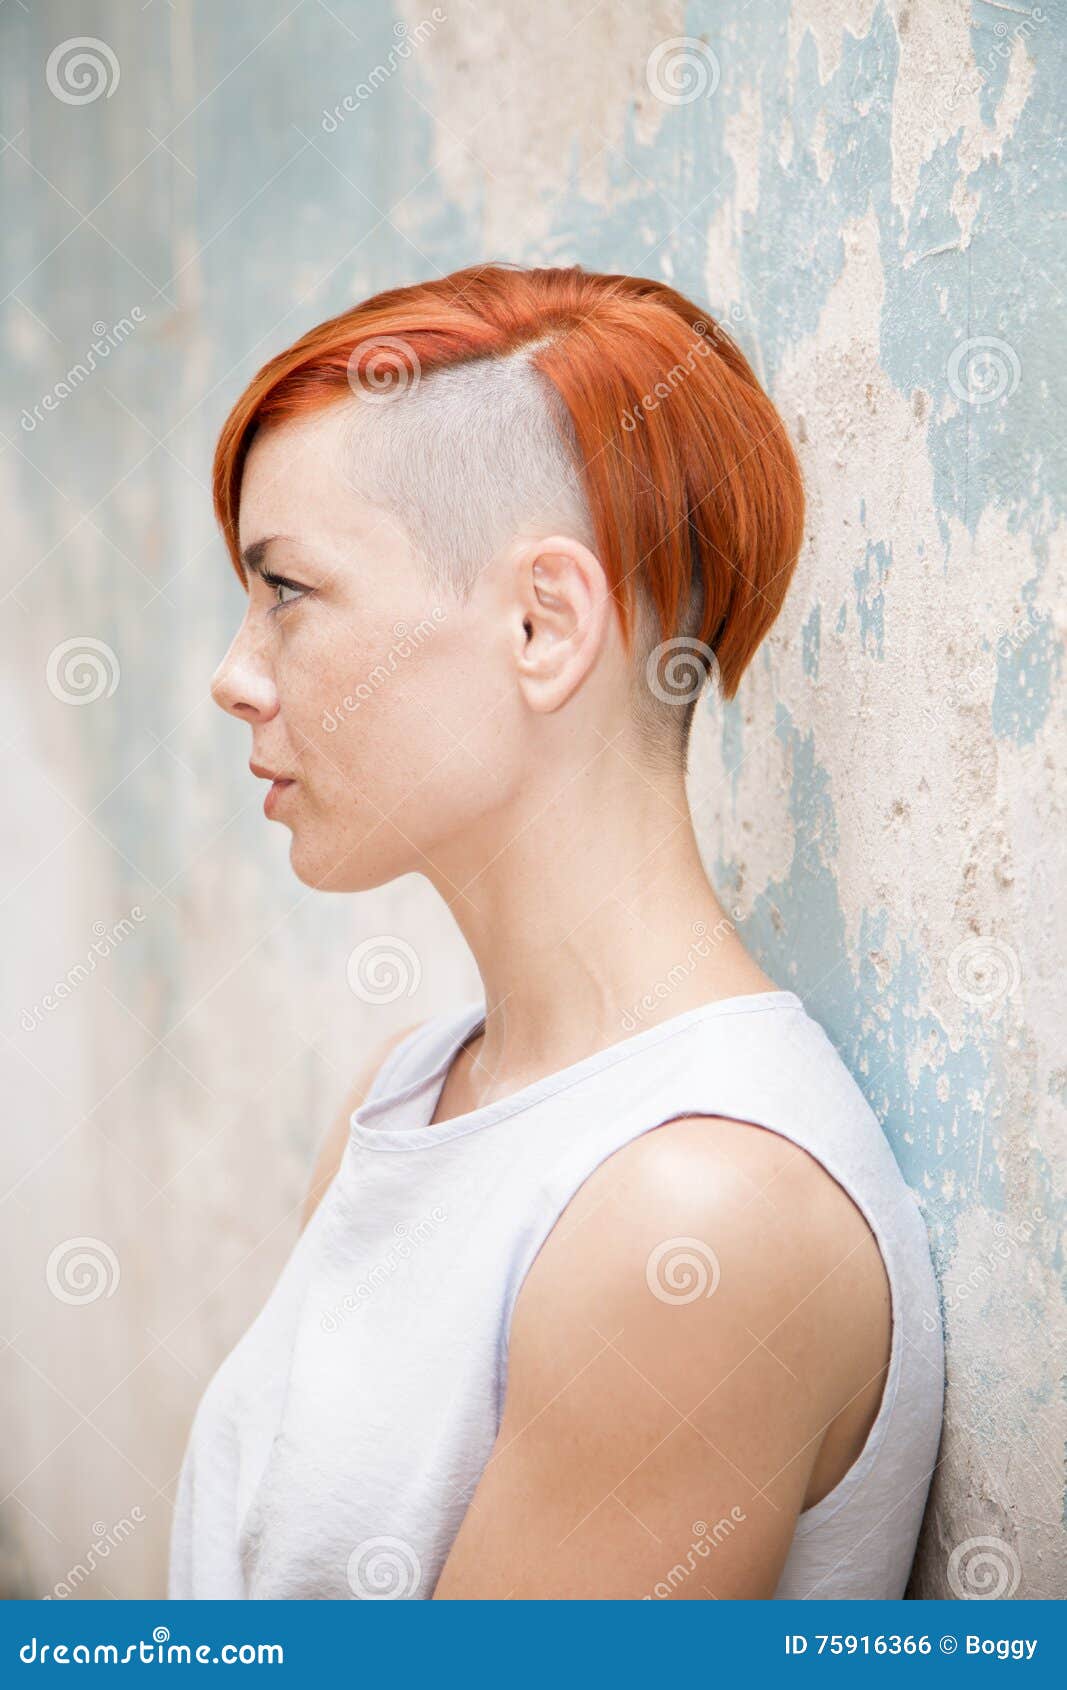 Redheads Shaved